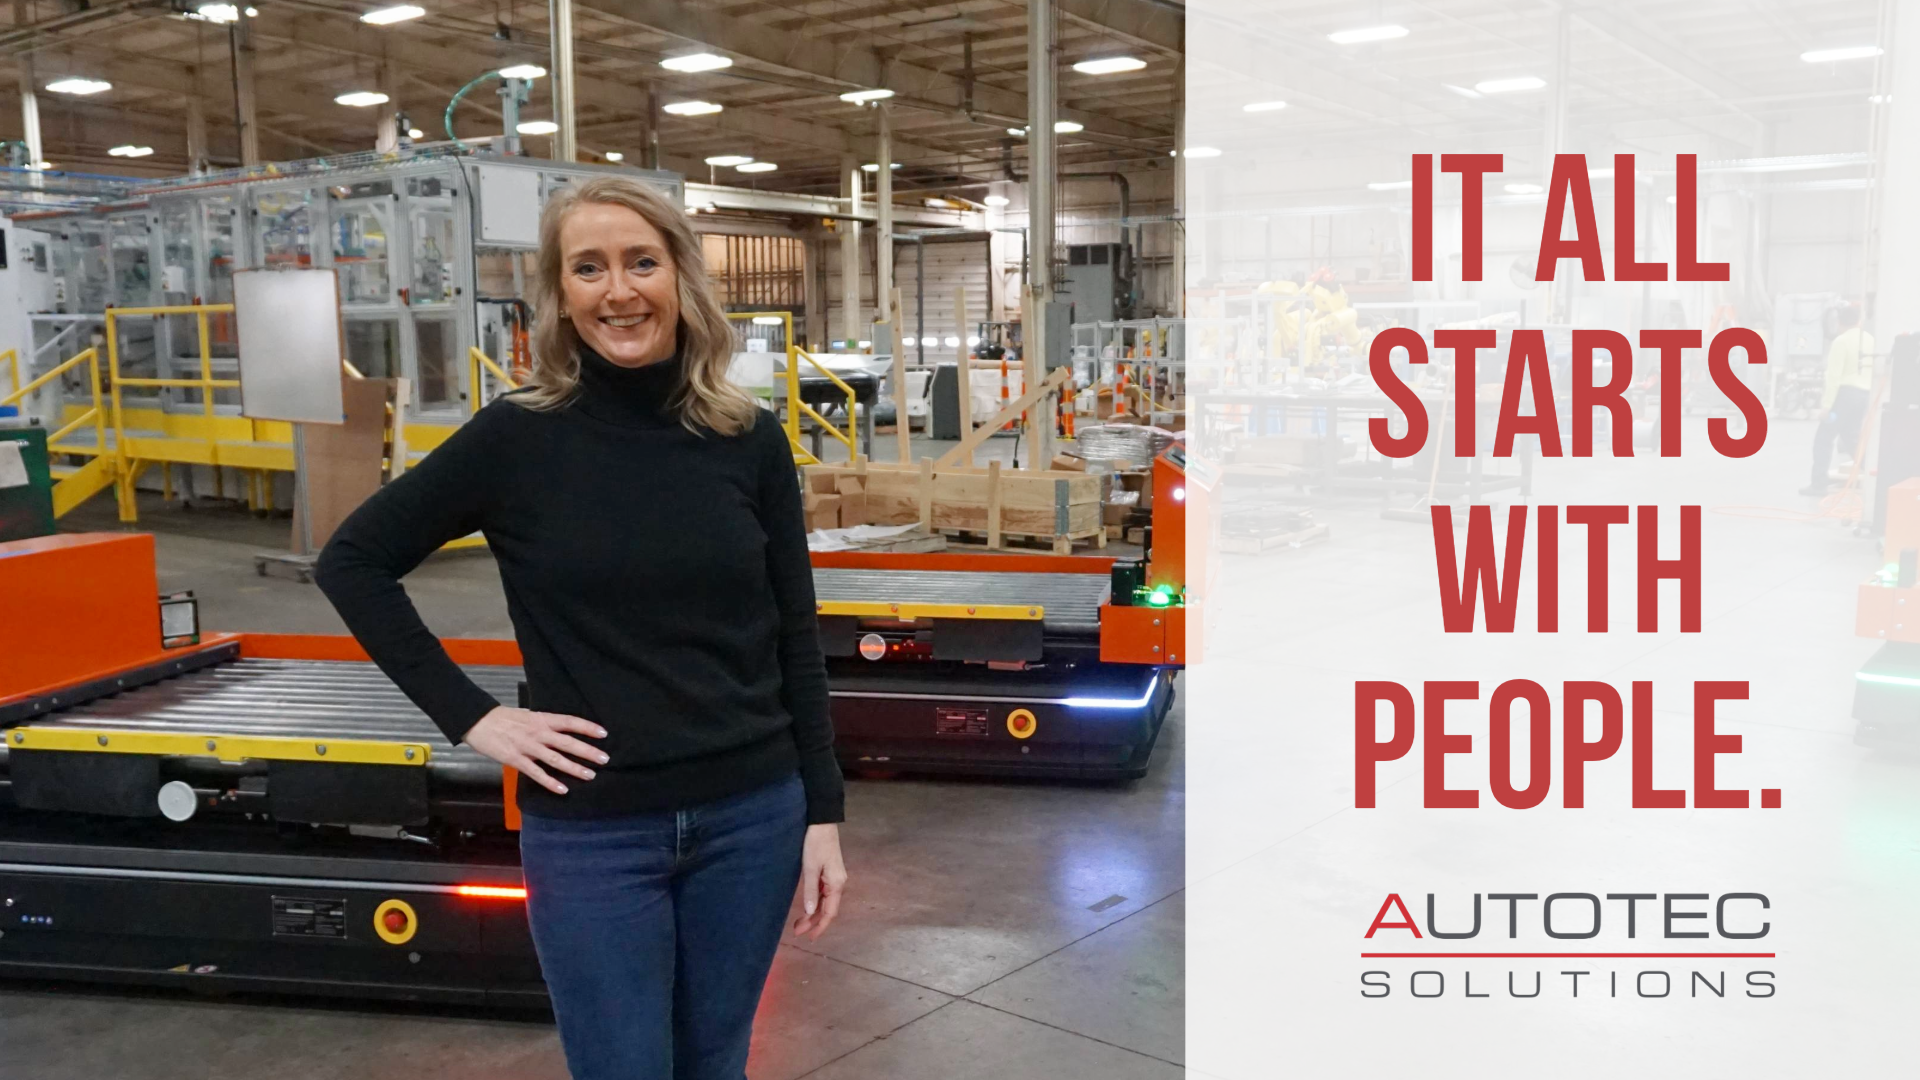 People of Autotec Solutions Series | It All Starts With People | Andrea in front of fleet of Autotec Solutions Autonomous Mobile Robots